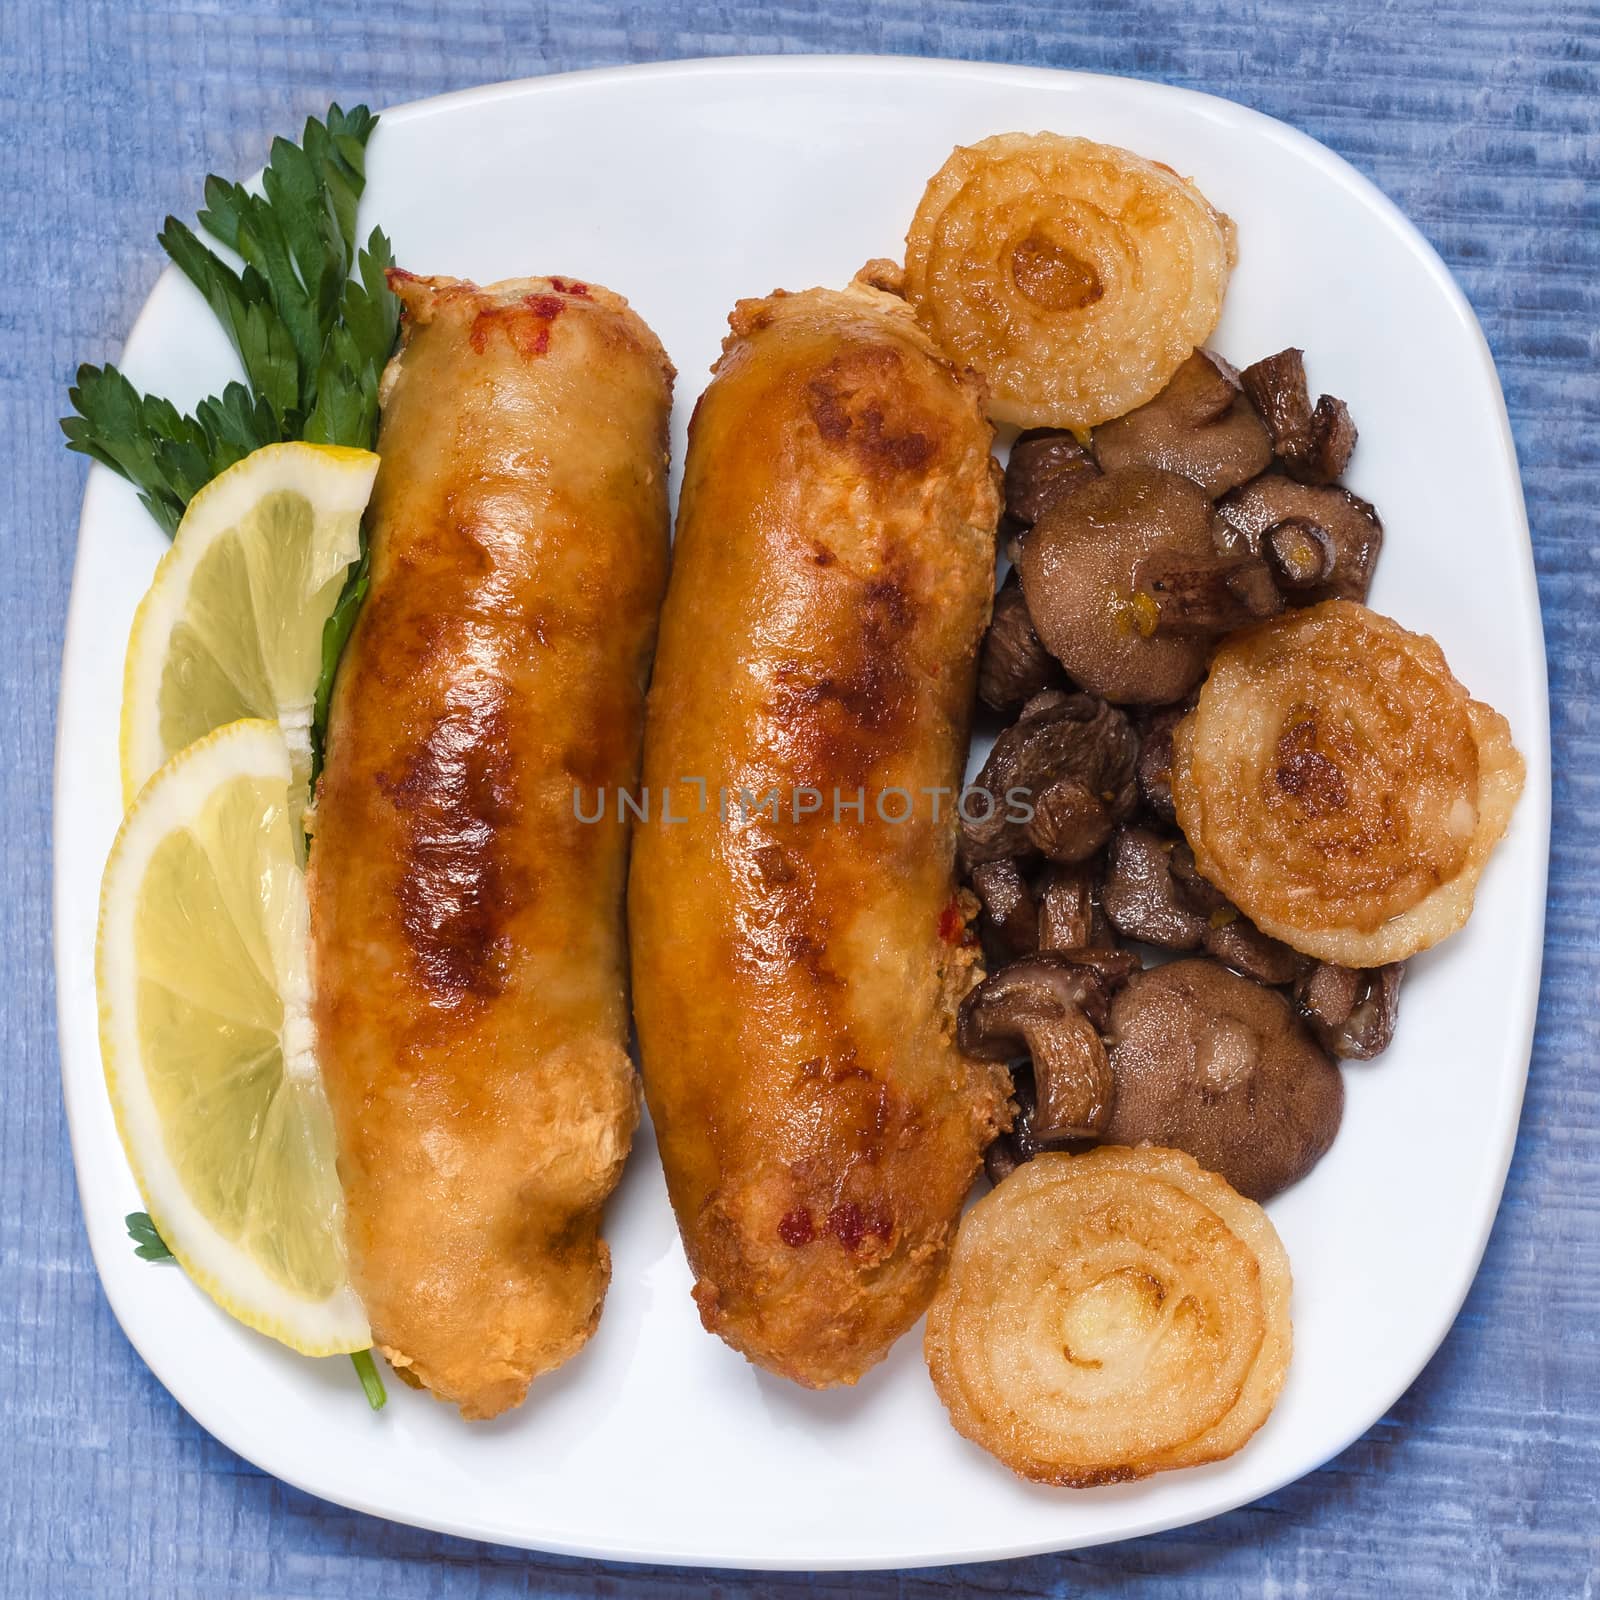 Fried sausage with mushrooms and onions, on wooden background toned with blue.